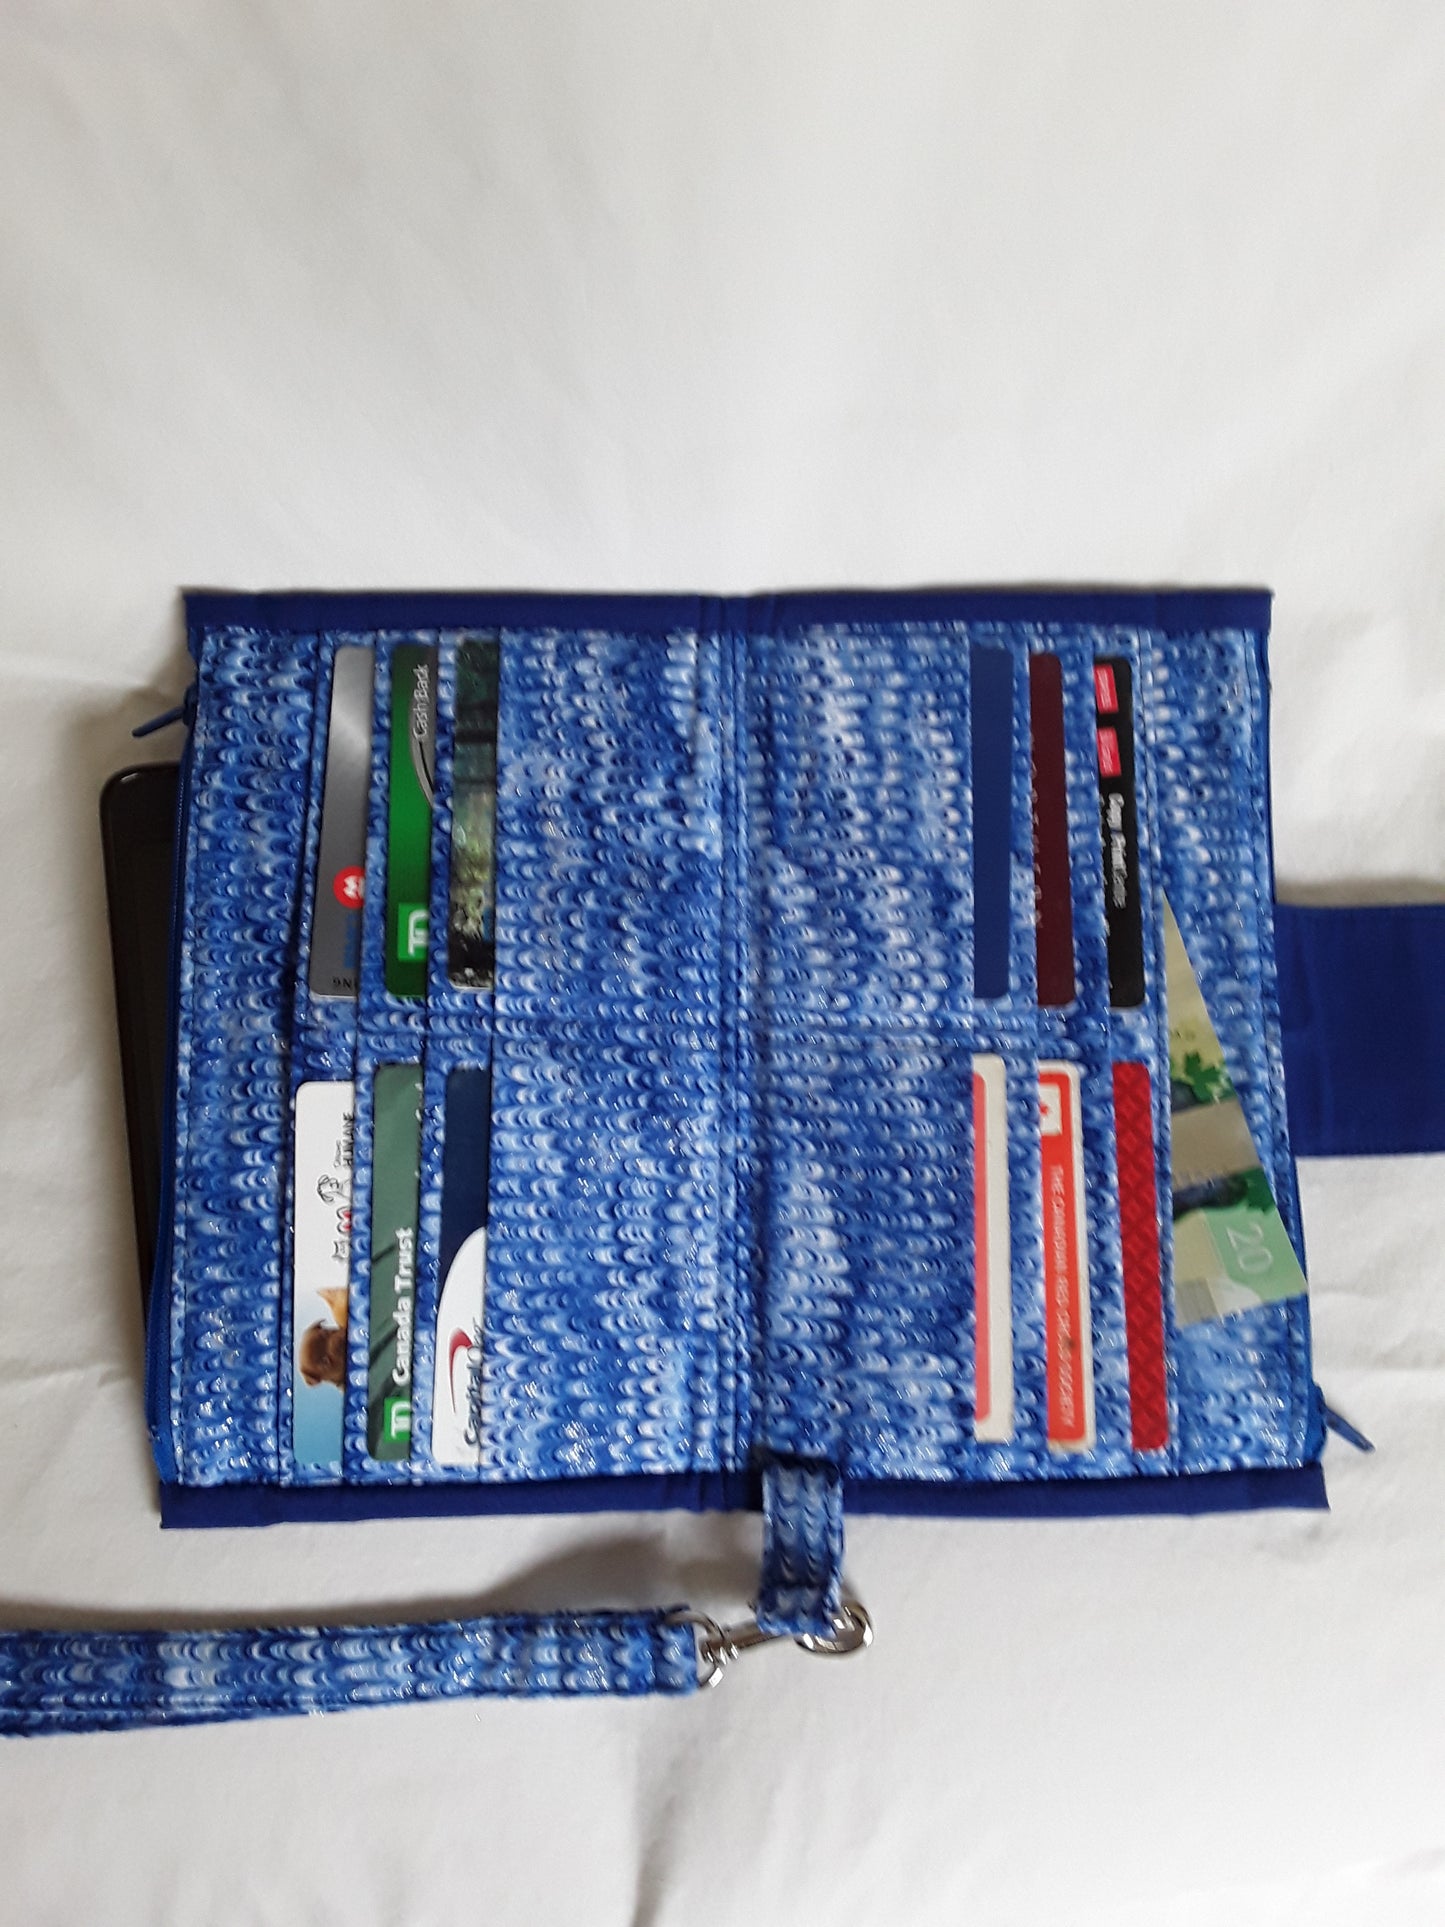 Wallet, Blue wallet with removable wrist strap, Wallet and card holder